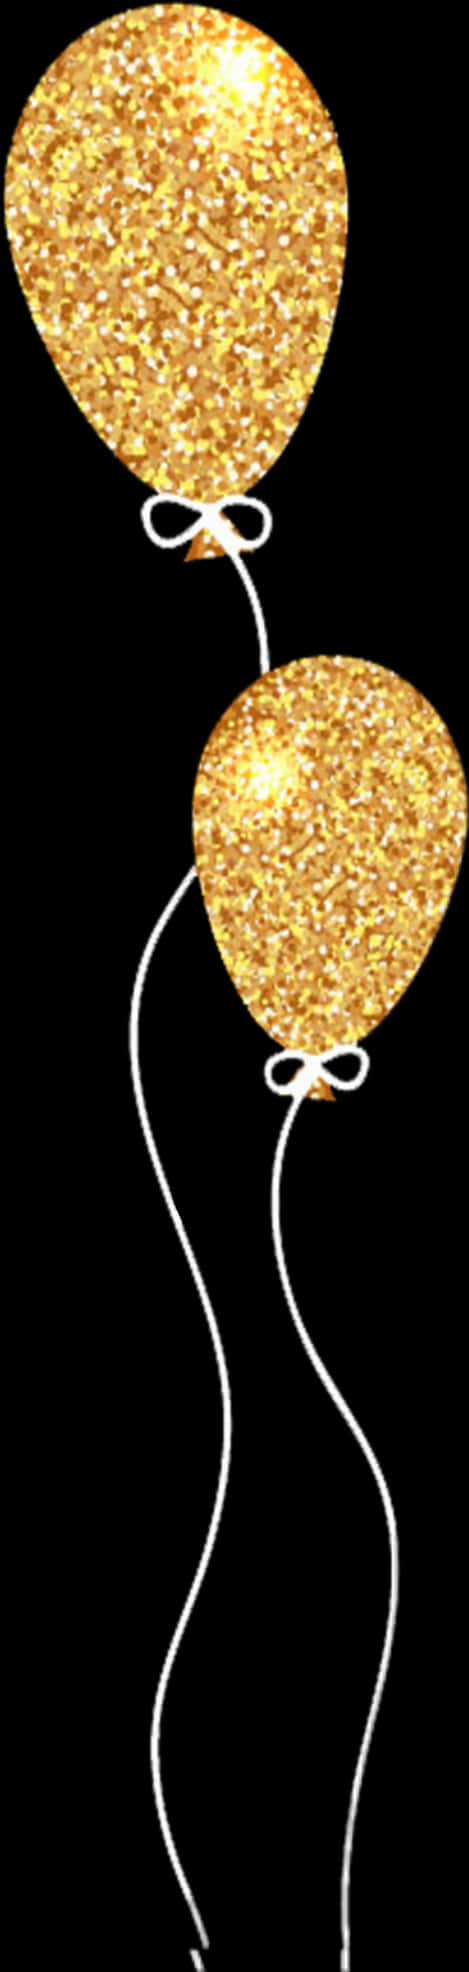 A Gold Balloon With A White String